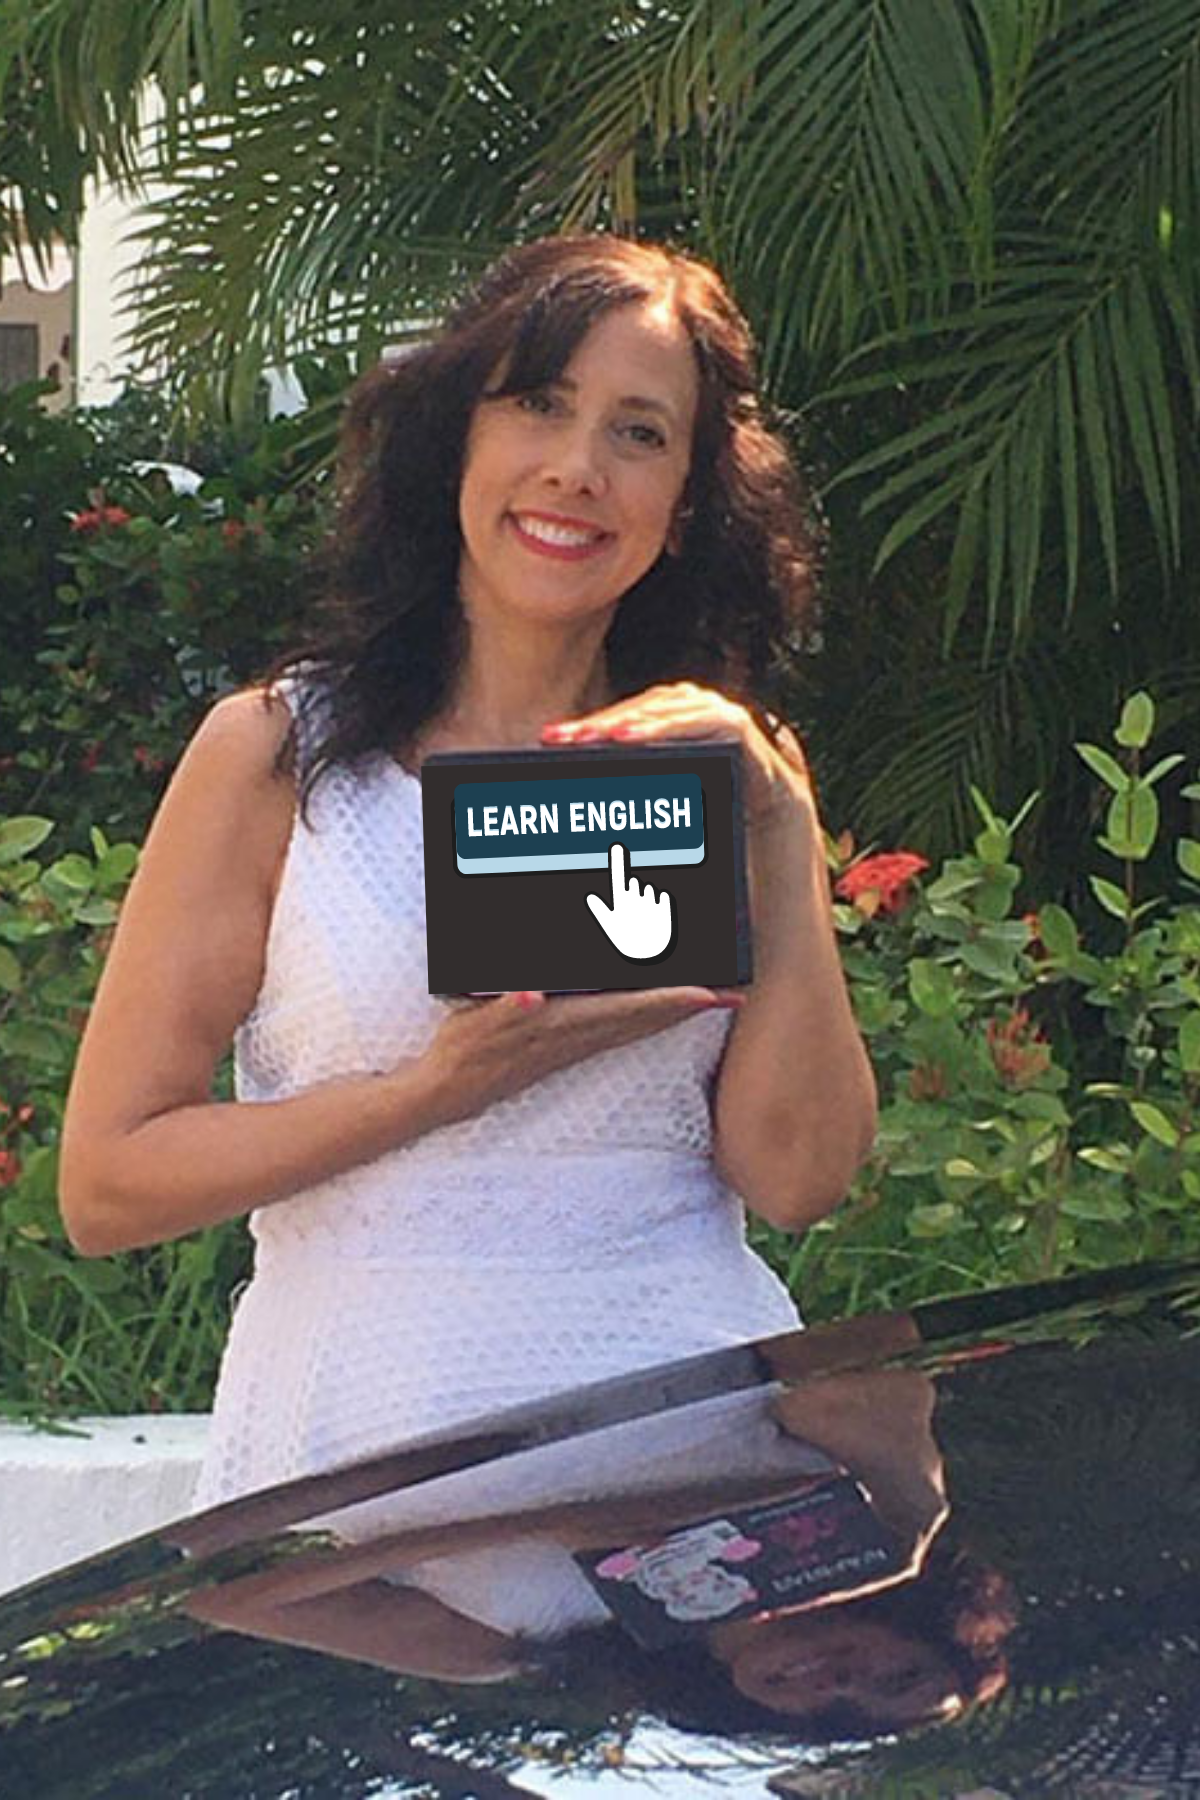 Suzanne Sanford, the CEO of Elevatest, holding up a learn English product